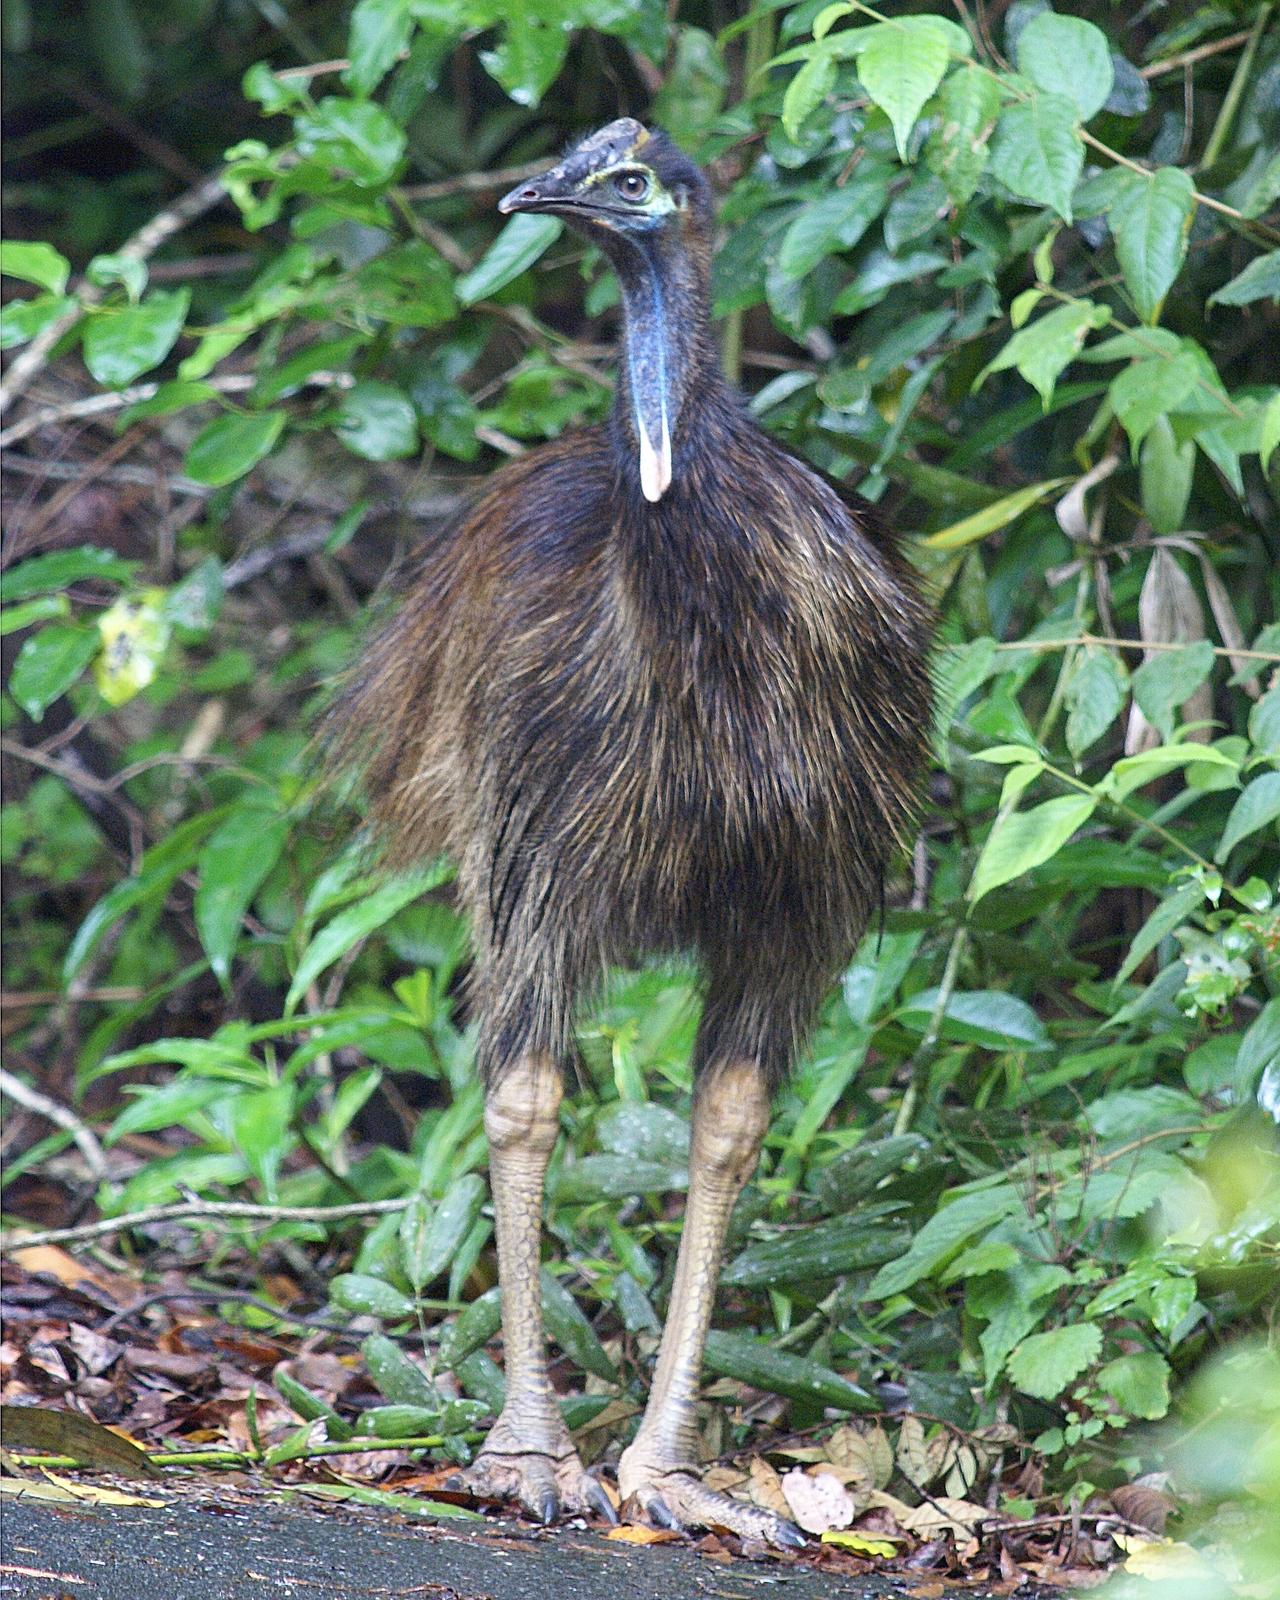 Southern Cassowary Photo by Steve Percival